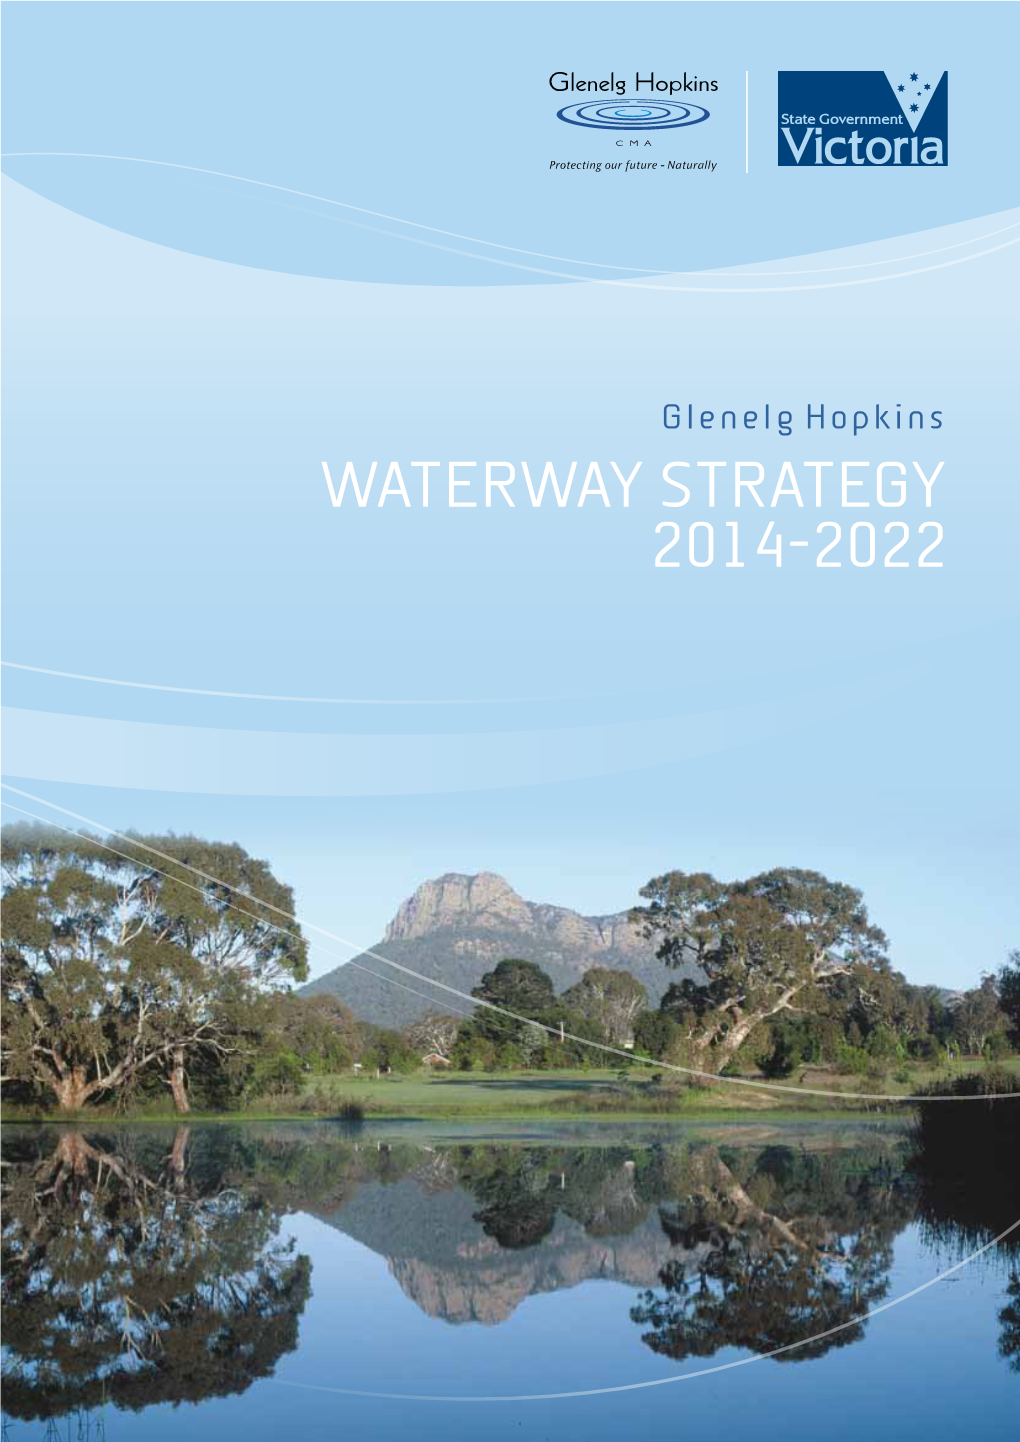 WATERWAY STRATEGY 2014-2022 Contents